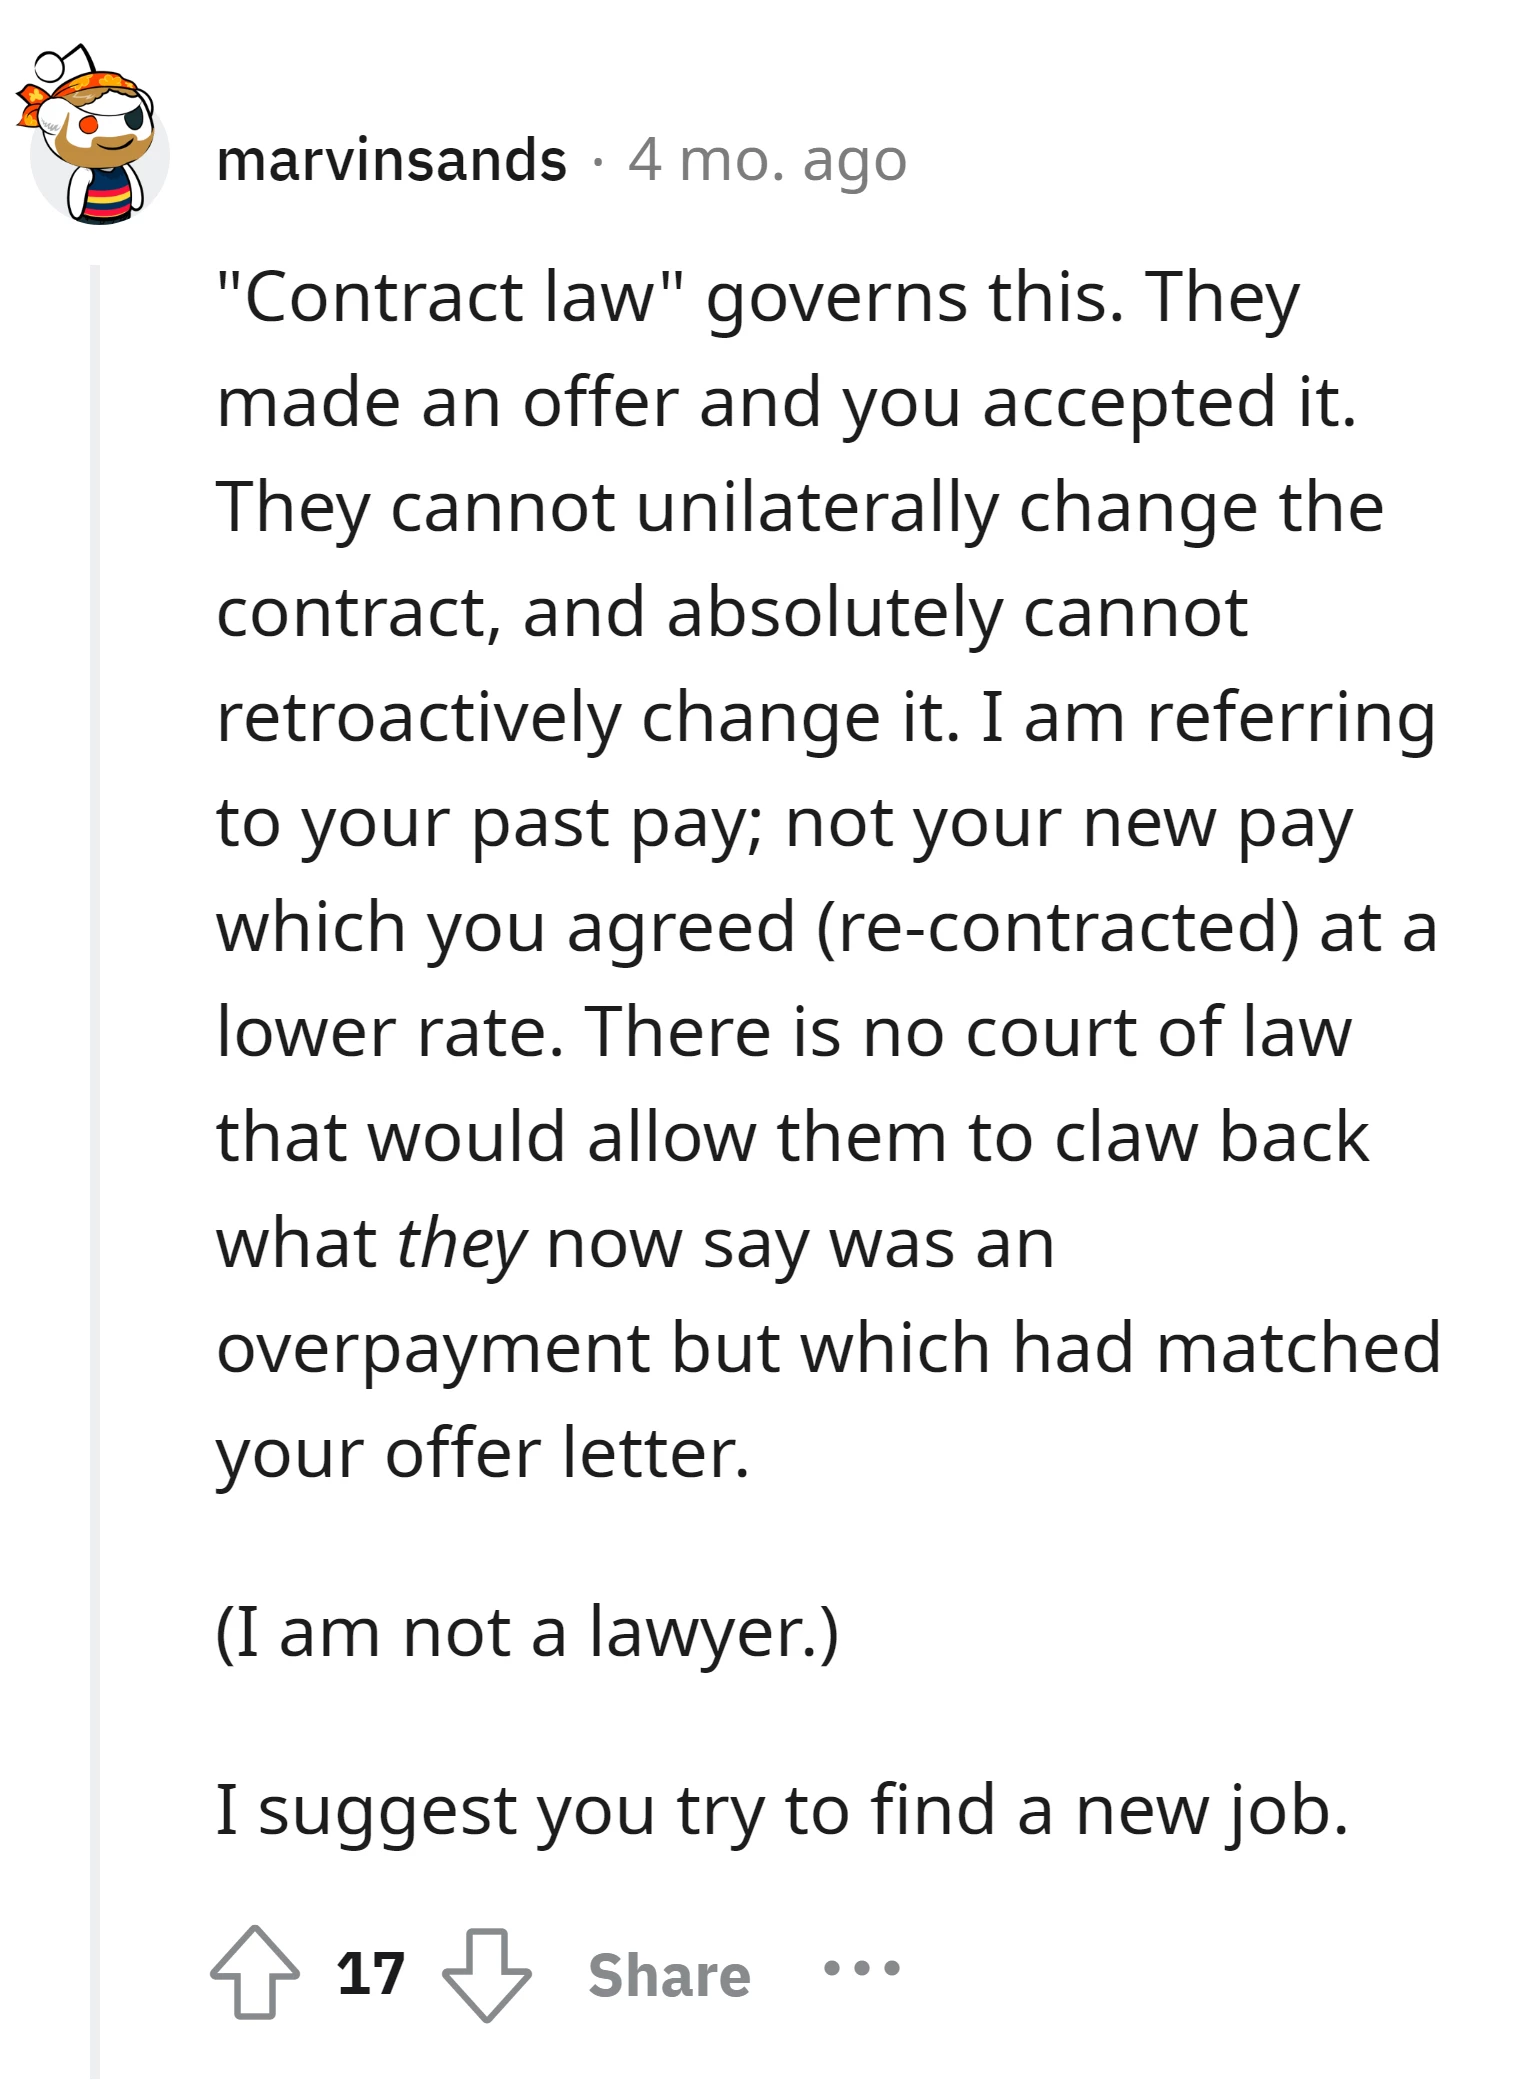 Contract law prohibits unilateral and retroactive changes to an accepted offer, especially regarding past pay